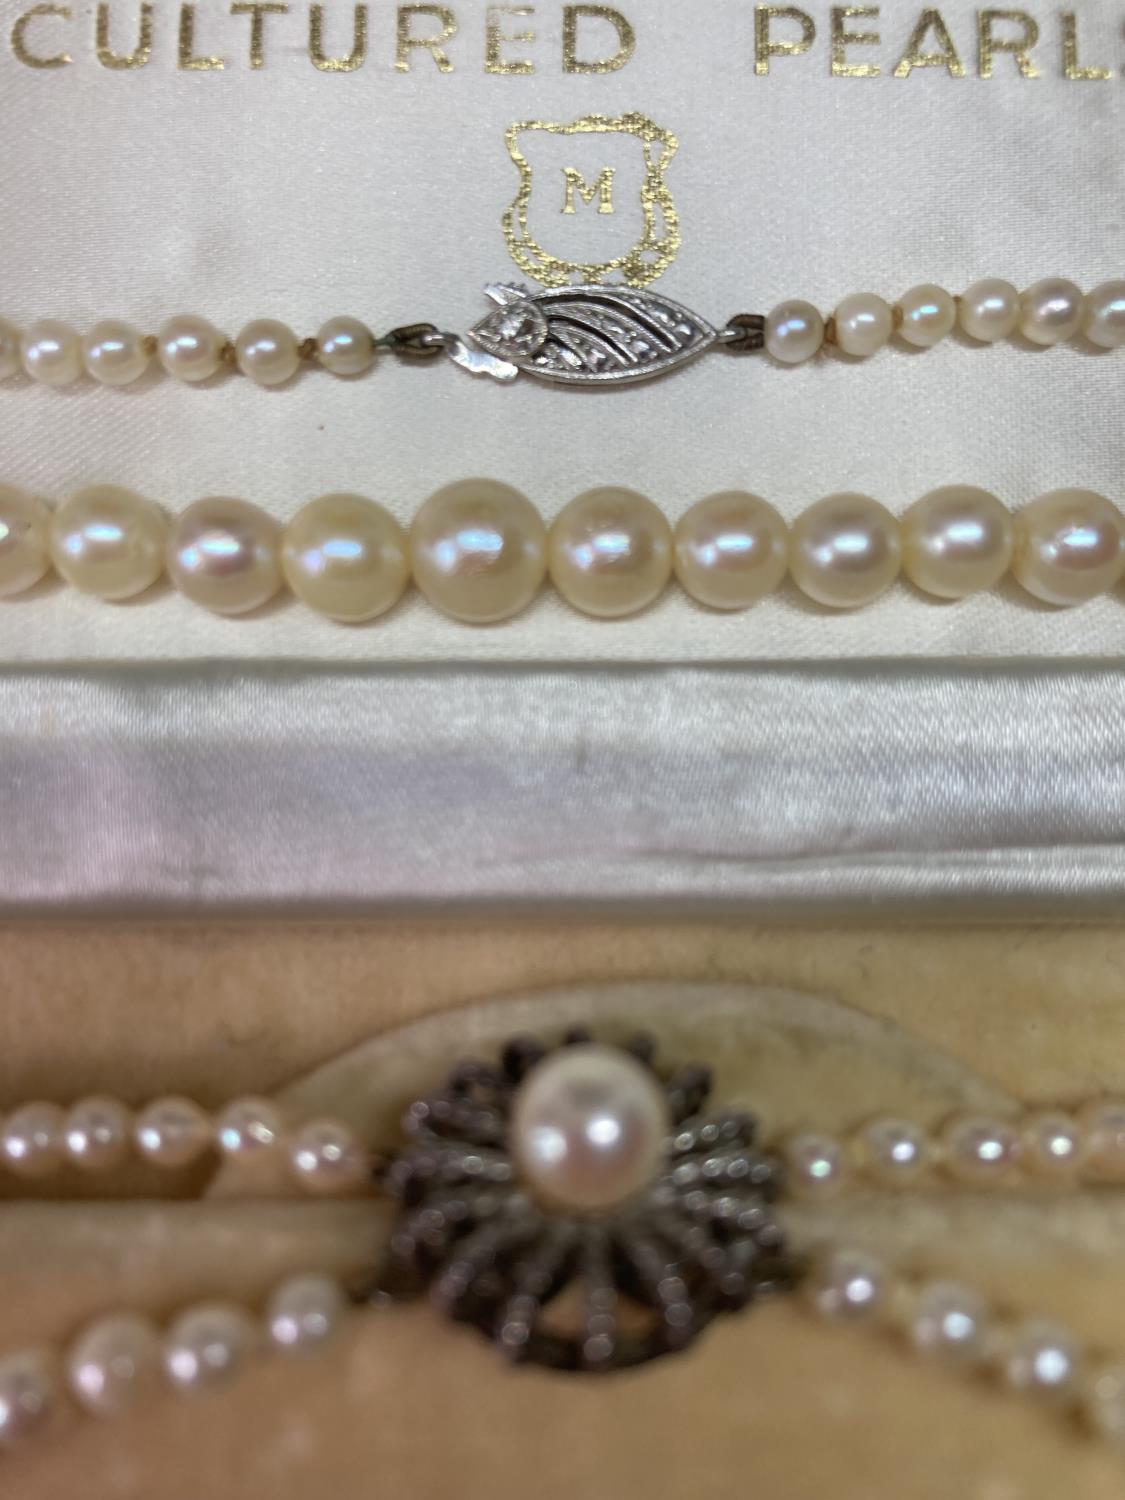 TWO SETS OF PEARLs IN A PRESENTATION BOX - Image 3 of 3